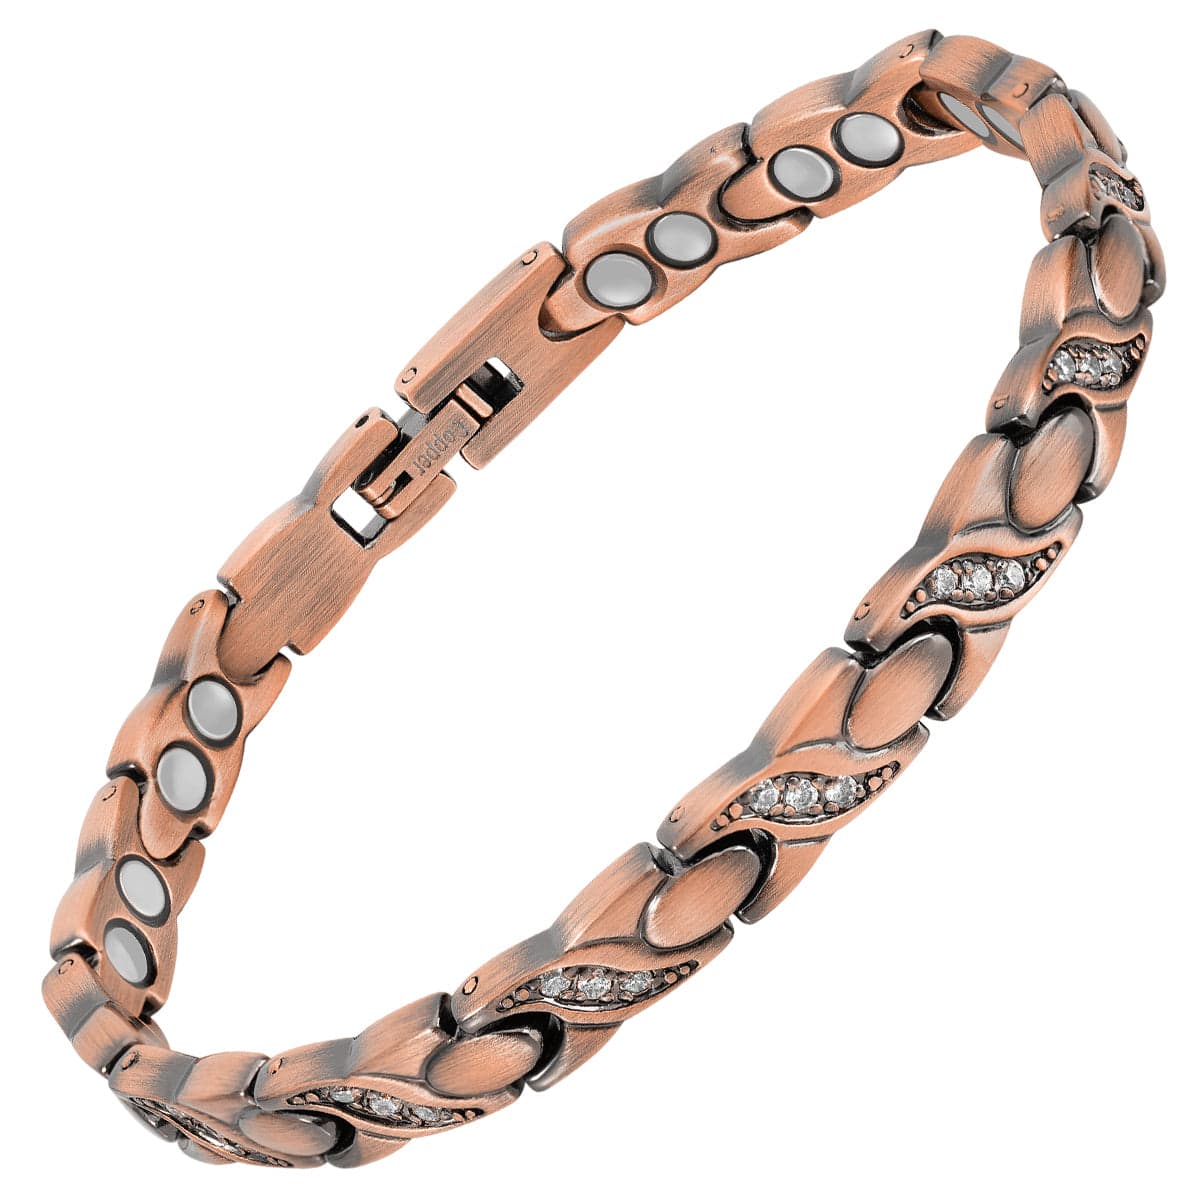 Amazon.com : Cigmag Magnetic Copper Bracelet for Women, Magnetic Bracelet,  Ultra Strength Magnets Solid Pure Copper, Jewelry Gift with Adjustable Tool  : Health & Household